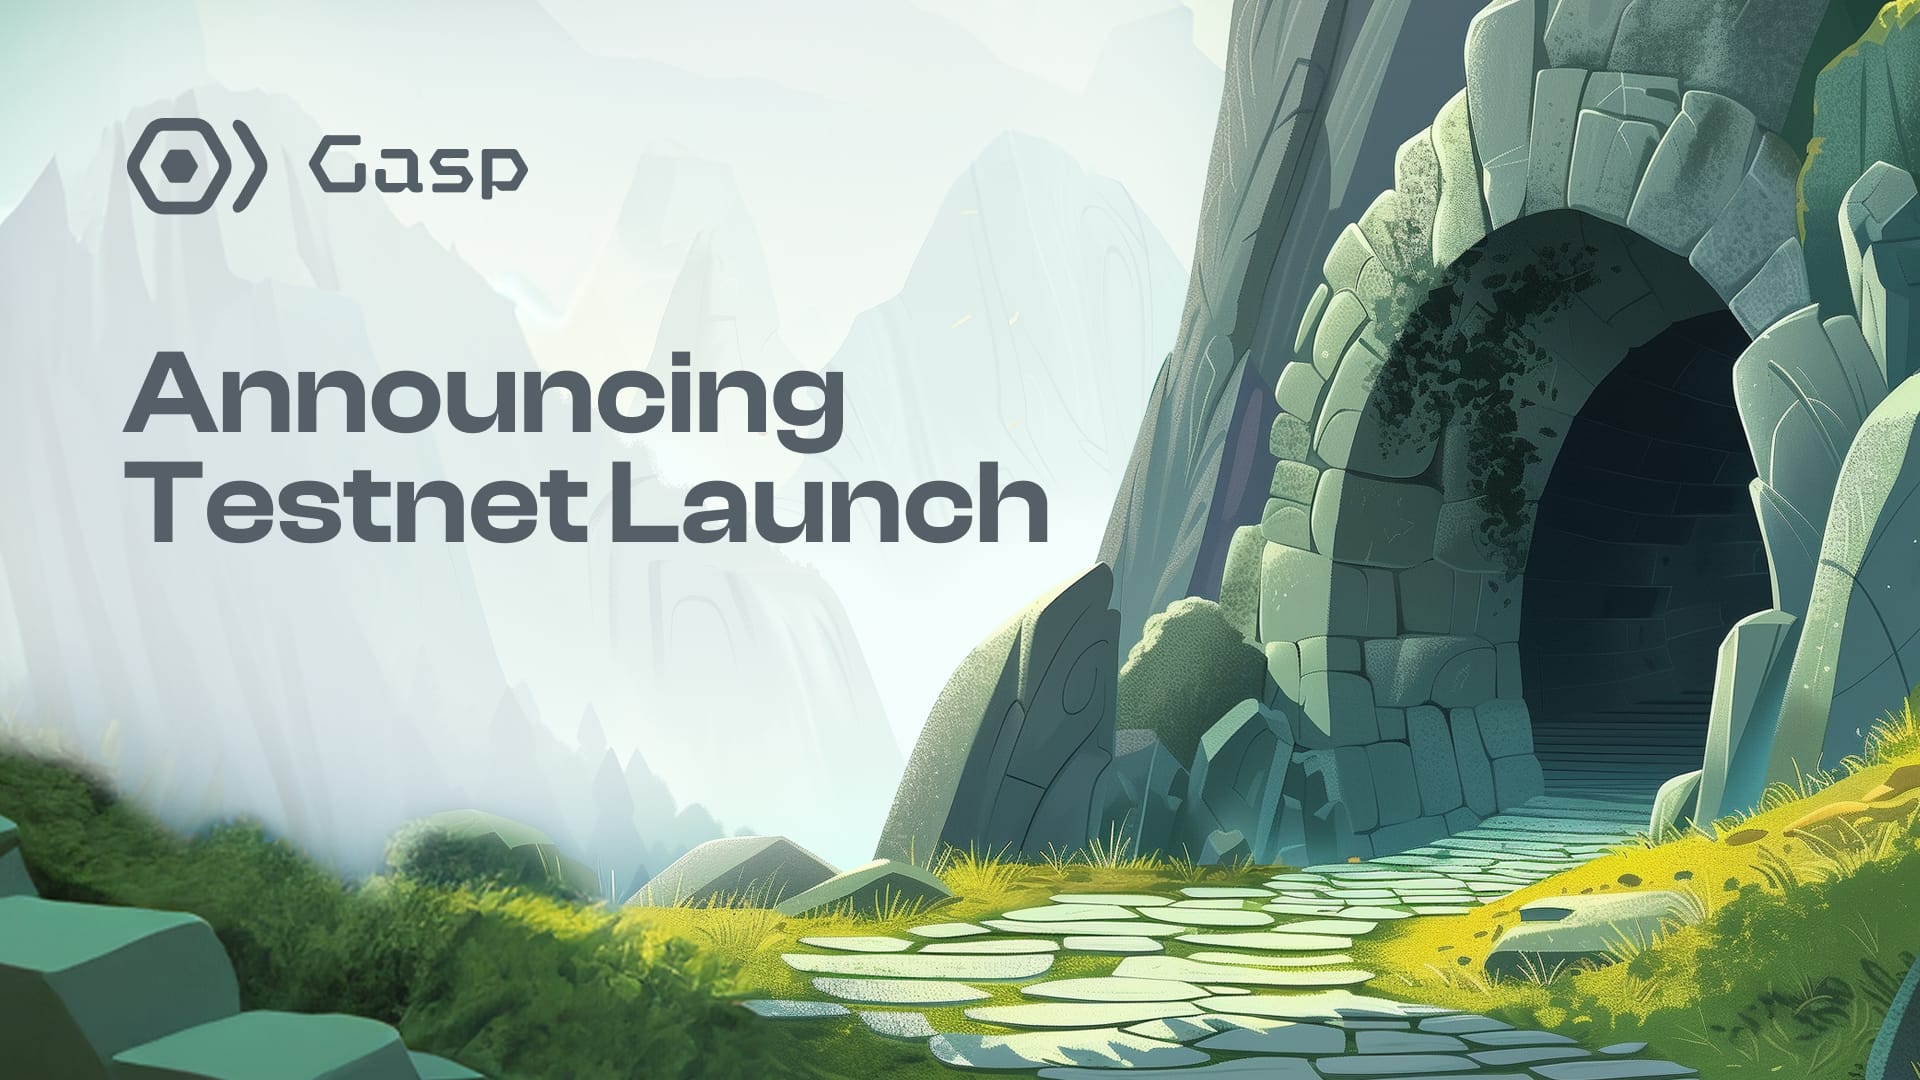 Announcing The Gasp Testnet Launch